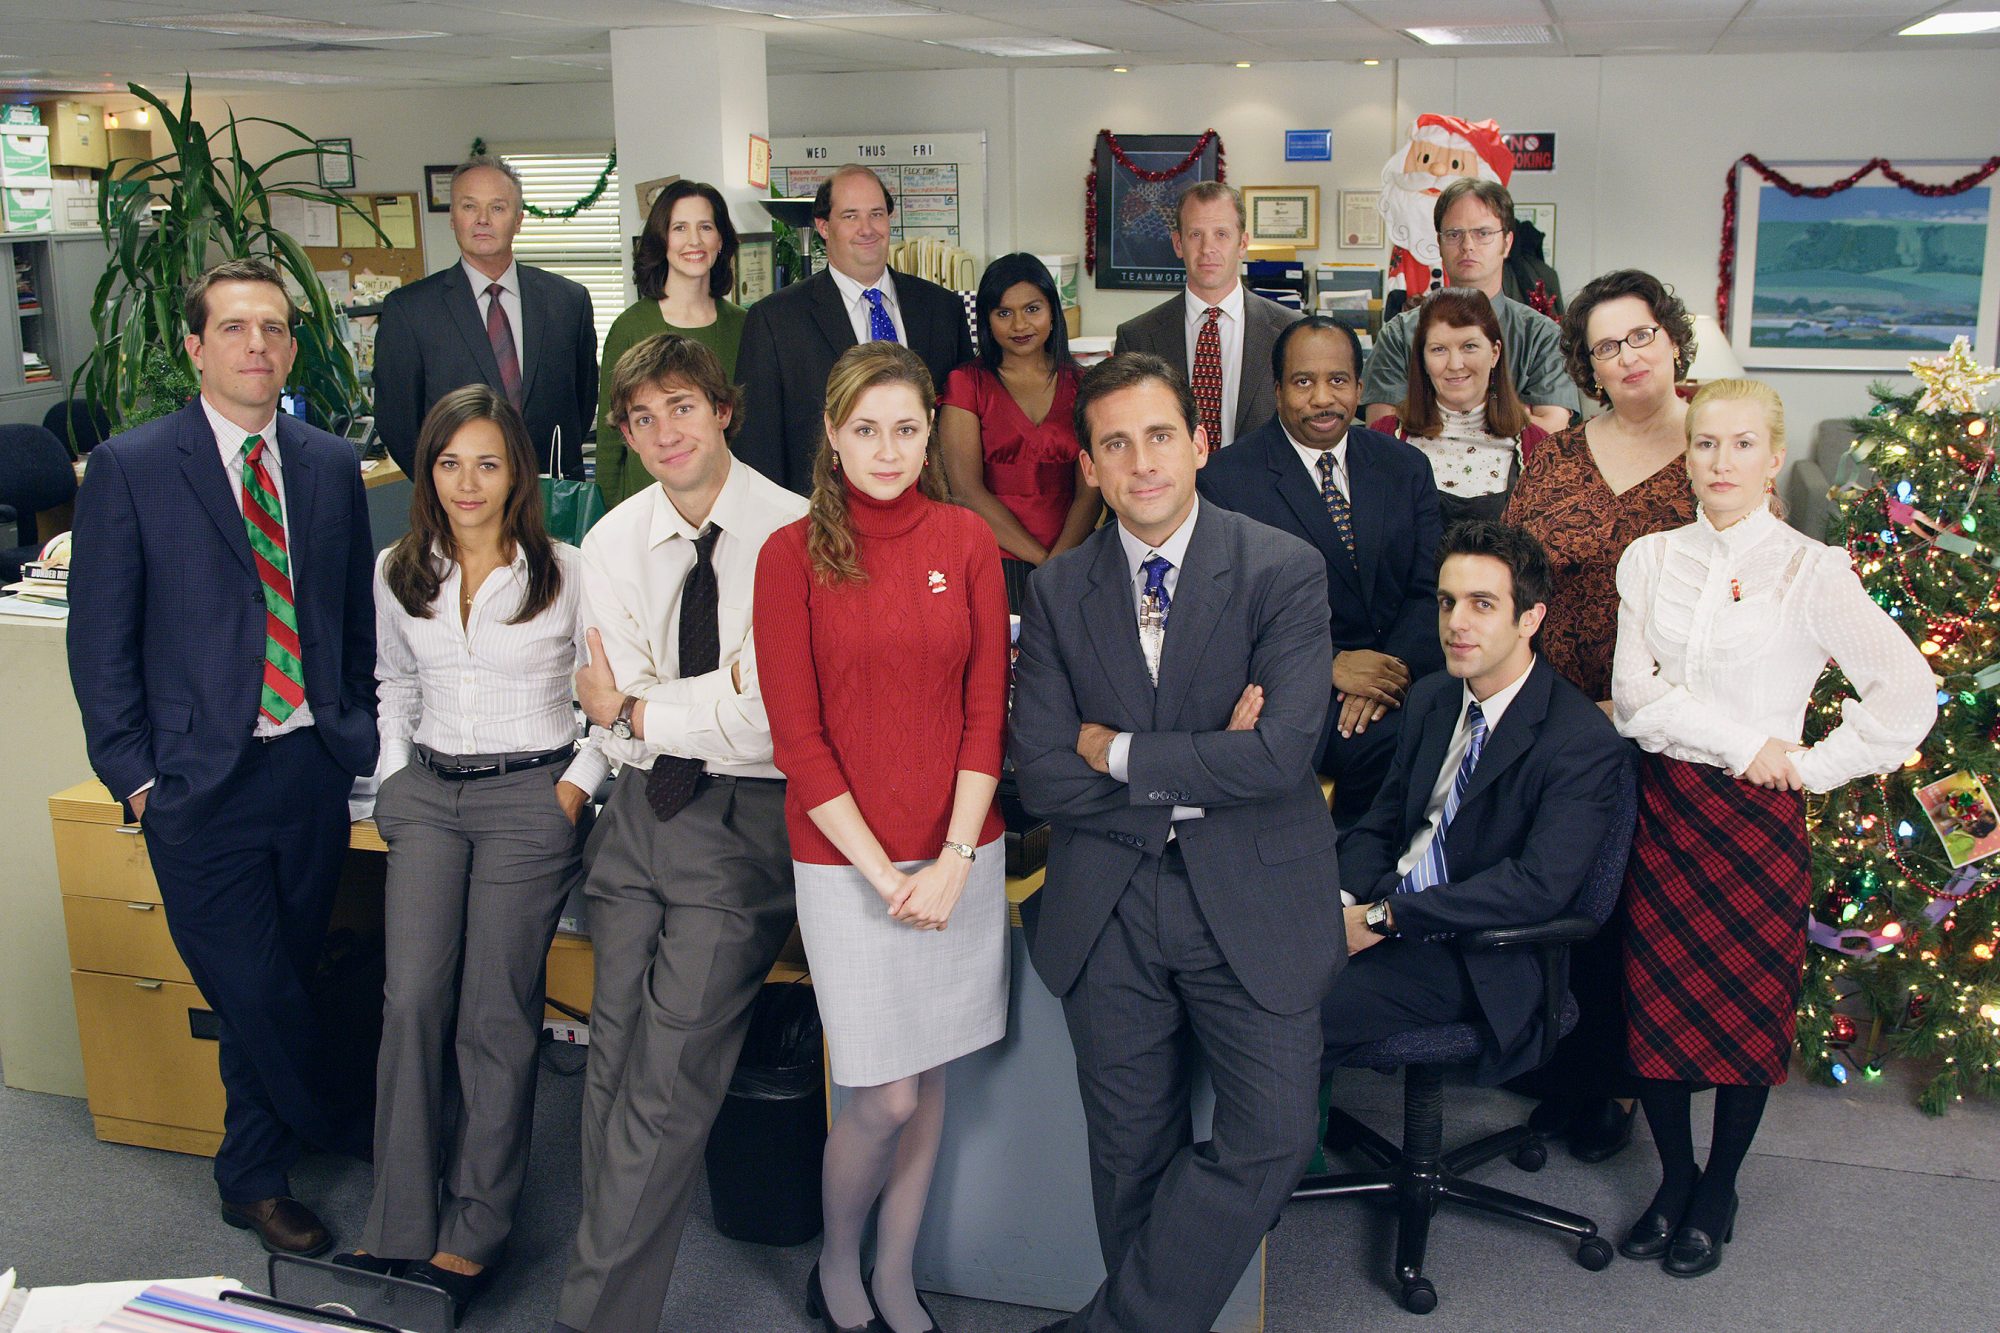 The Office Creator Greg Daniels Talks Popularity and Move to Peacock [Exclusive Interview]